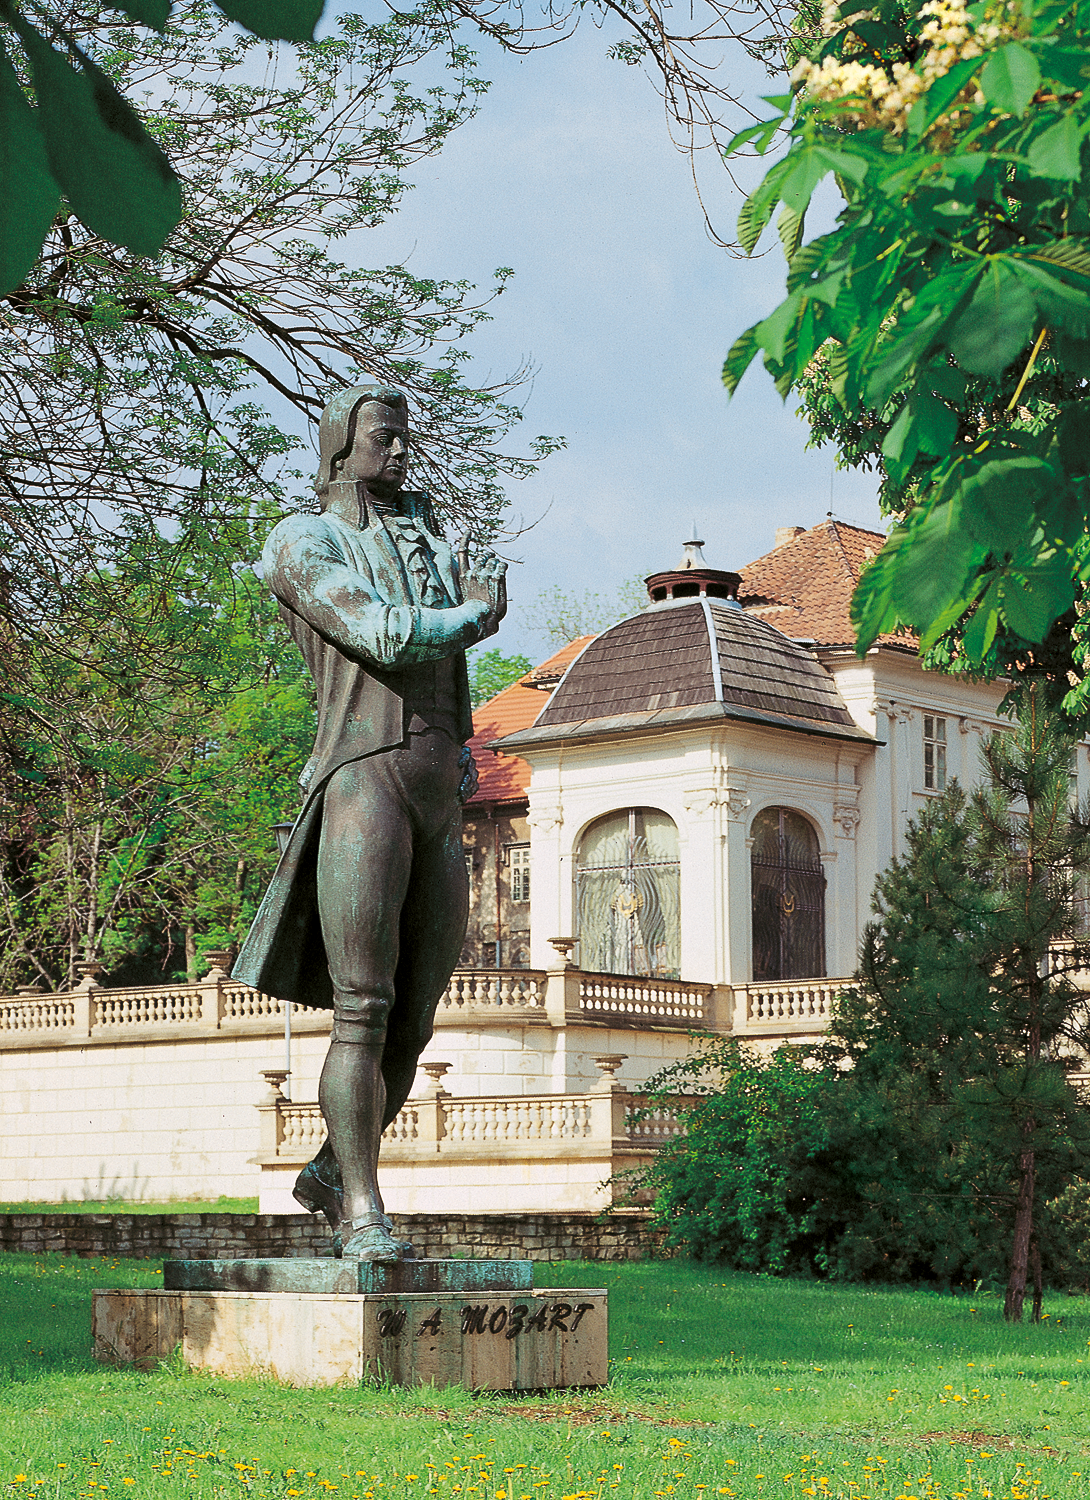 The Statue of Mozart